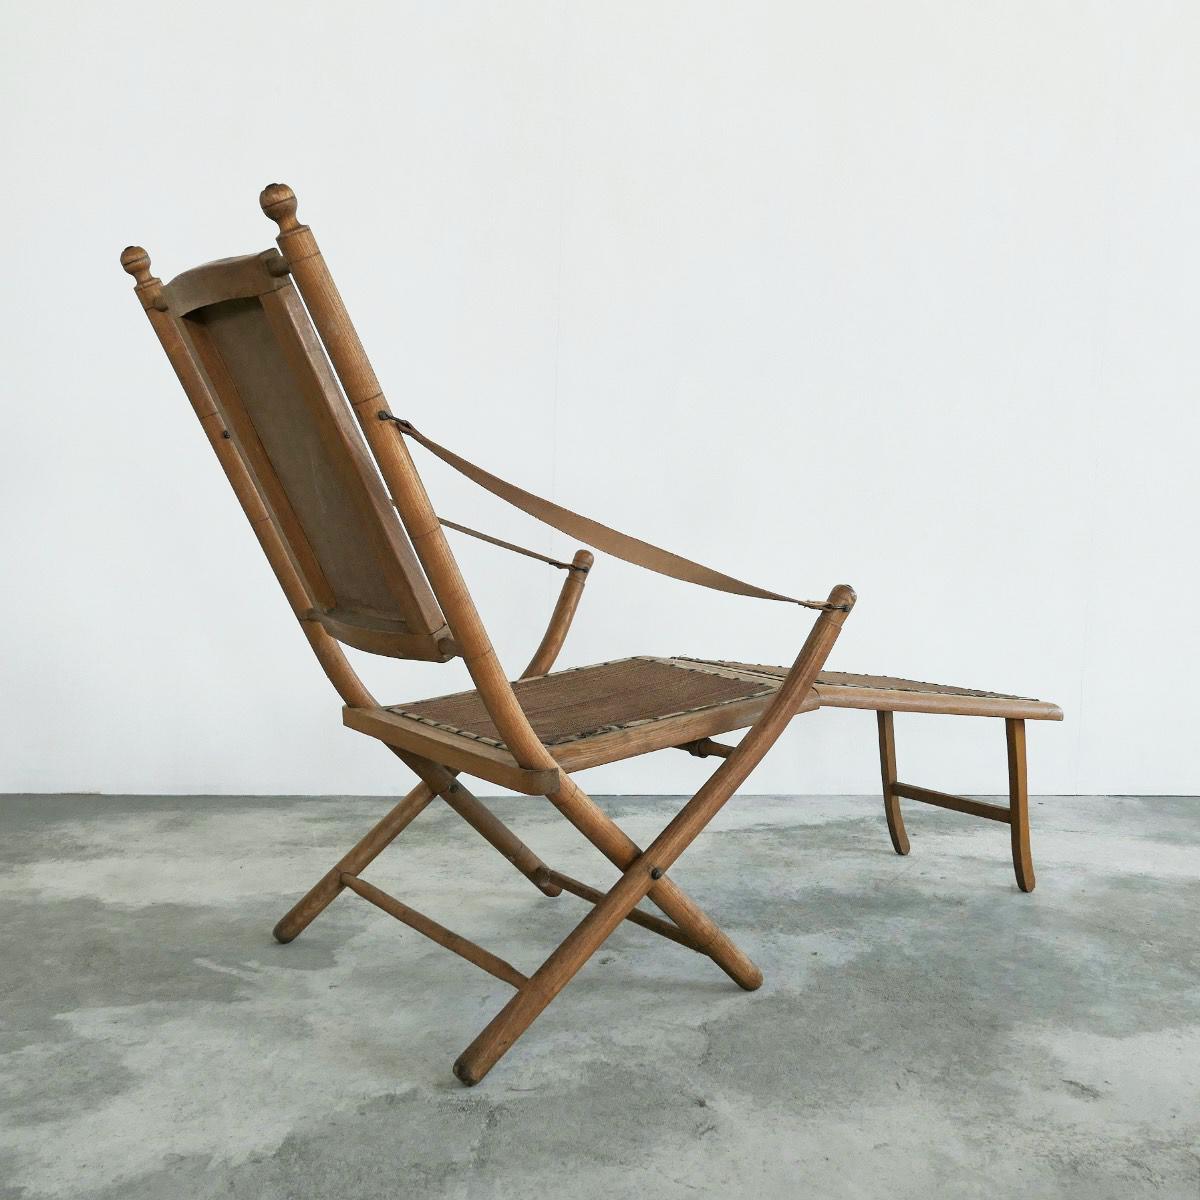 Wood Antique Chaise Longue or Deck Chair in Oak For Sale